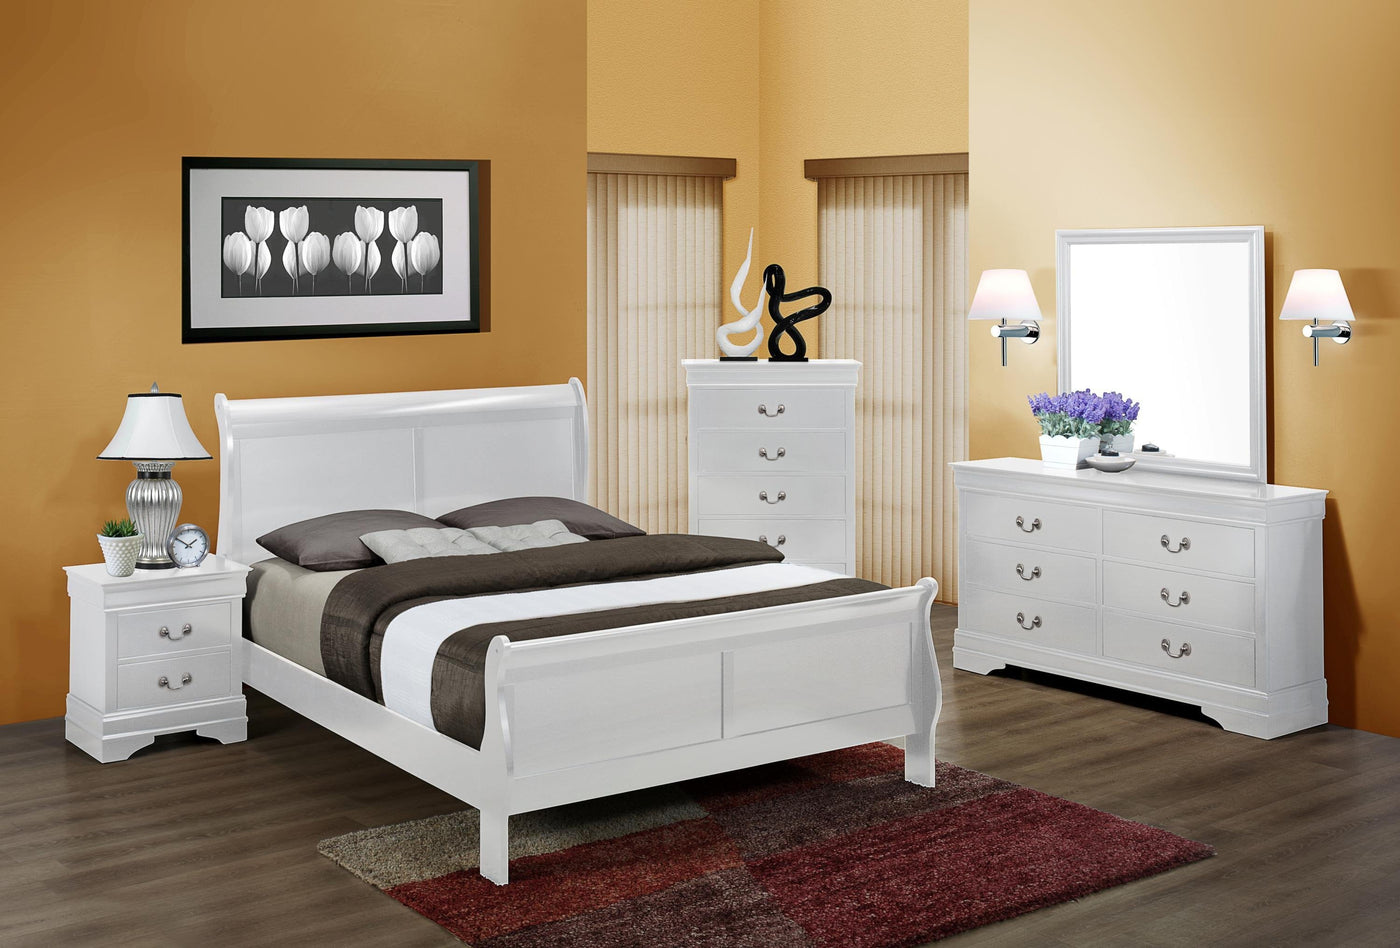 Louis Philippe Style Bedroom Furniture 4pc Set Queen Sleigh Bed